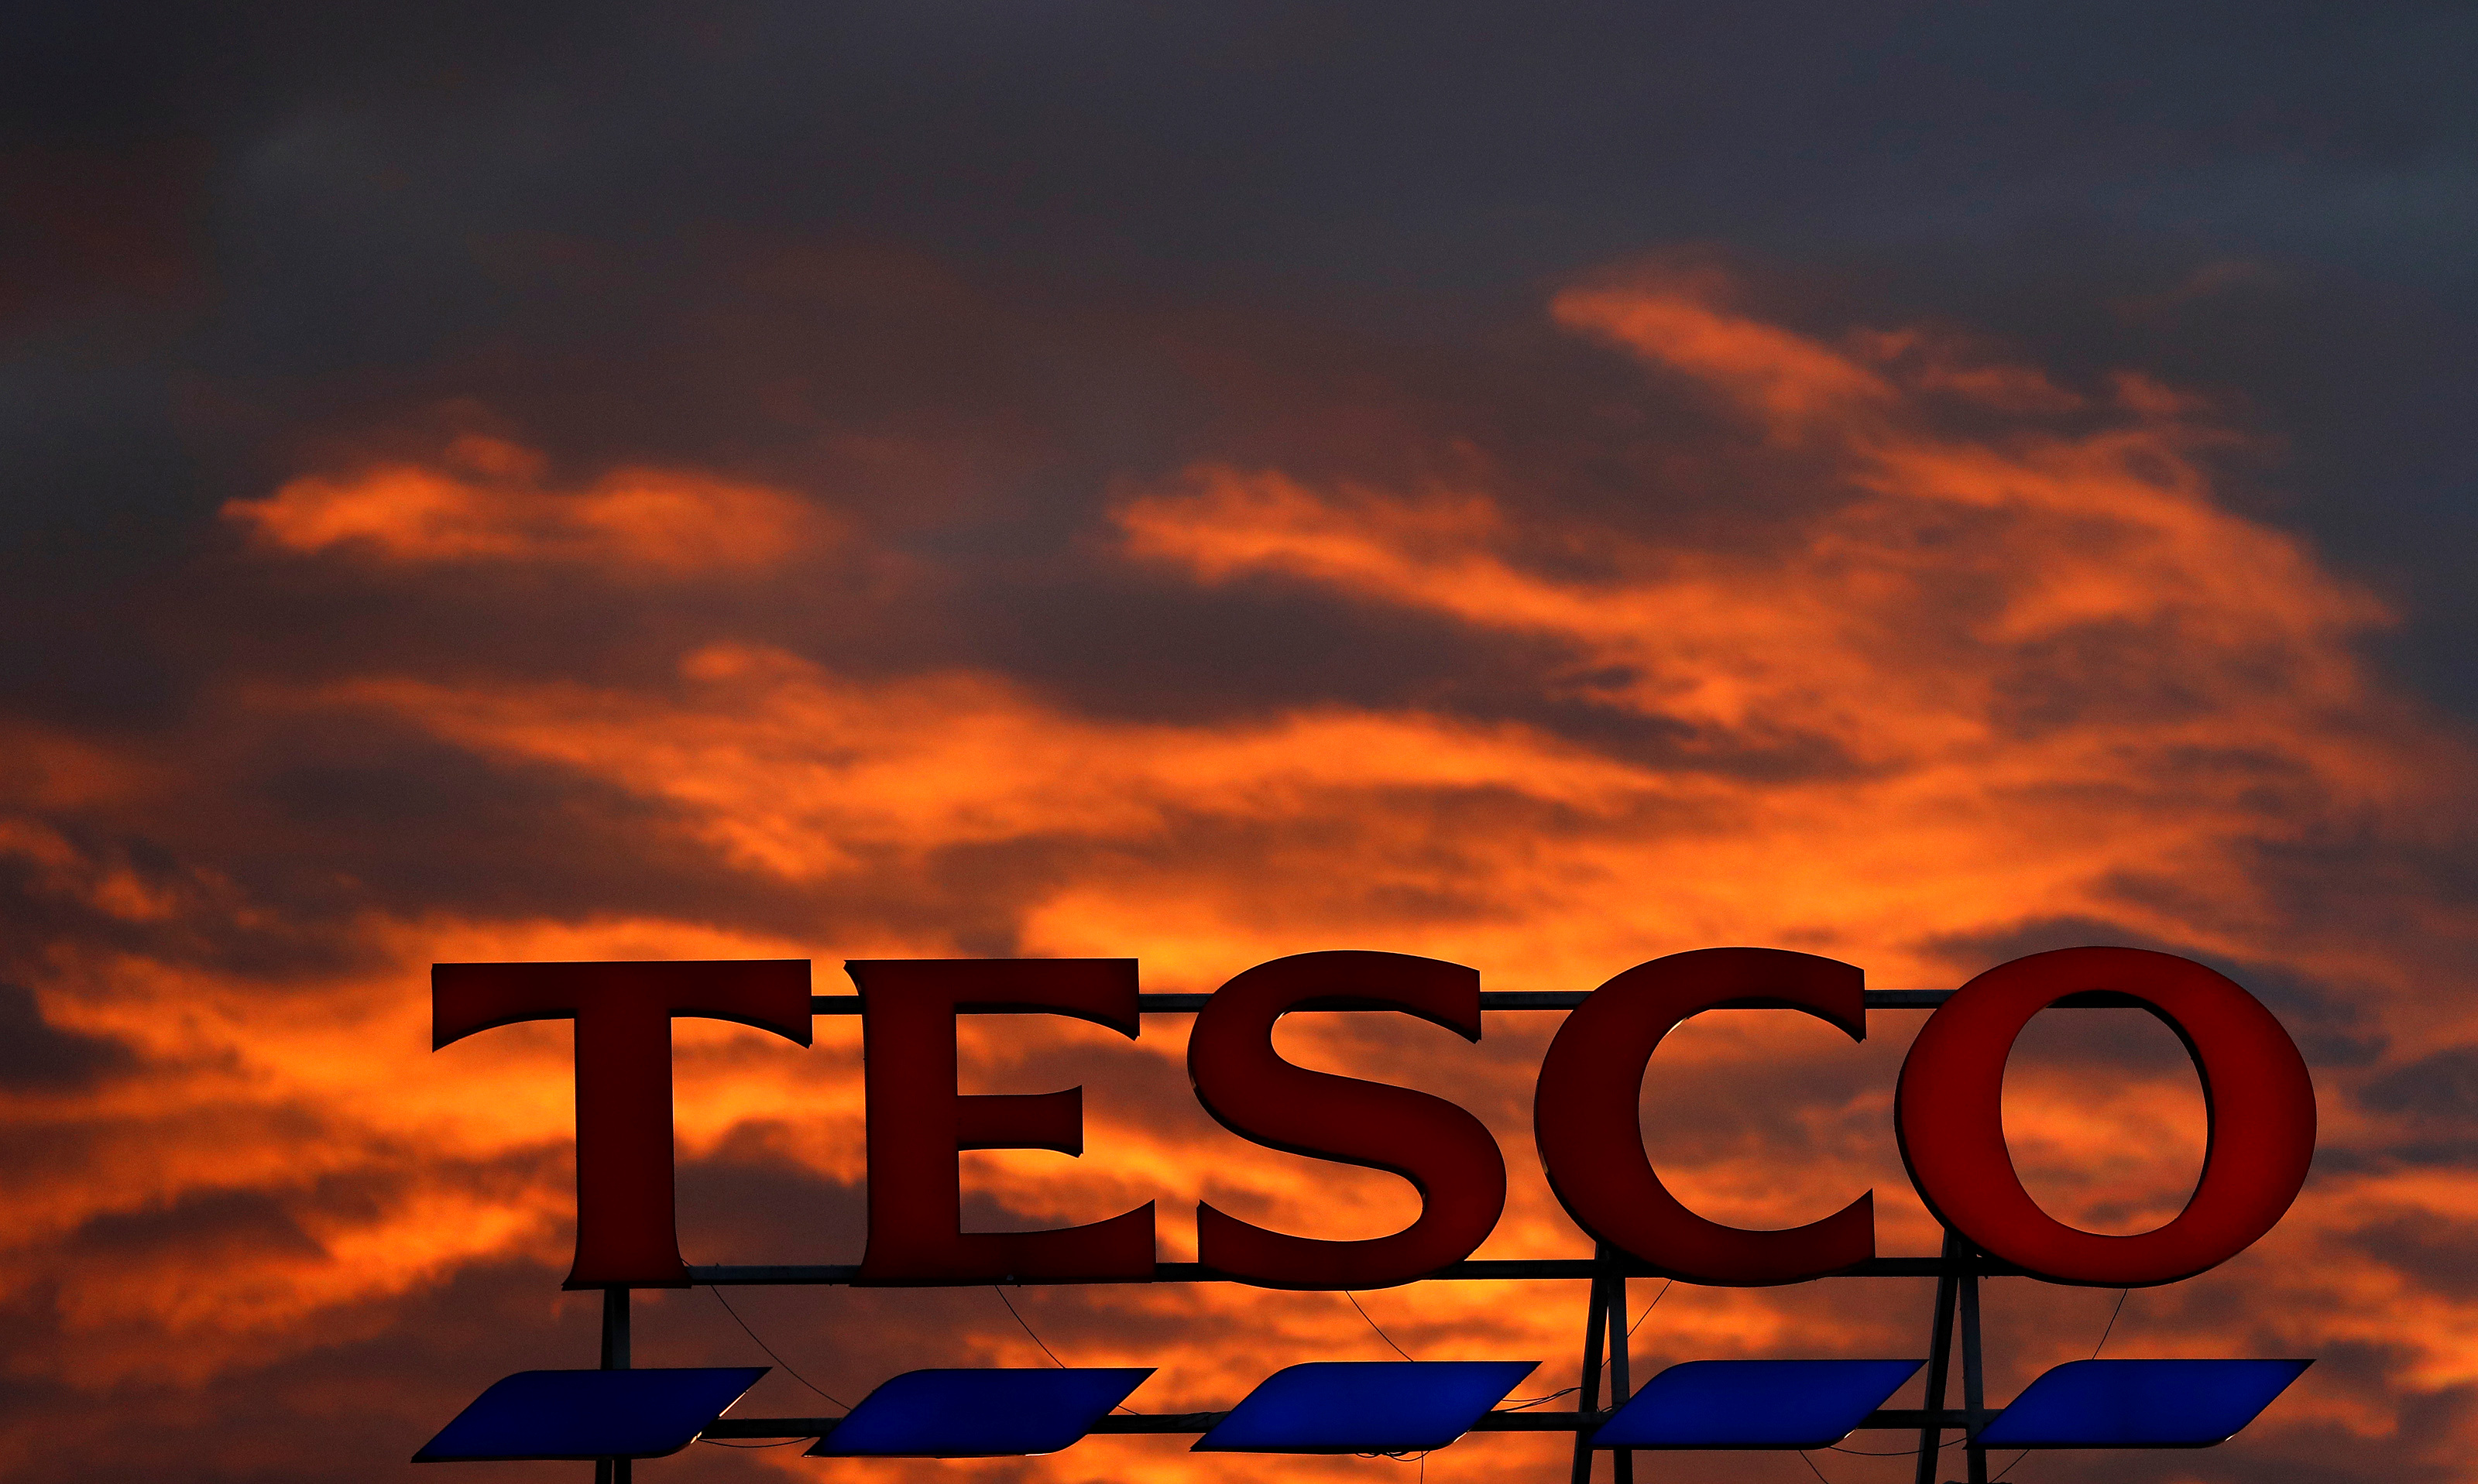 Tesco to cut 300 head office jobs while raising pay for shop workers, Tesco